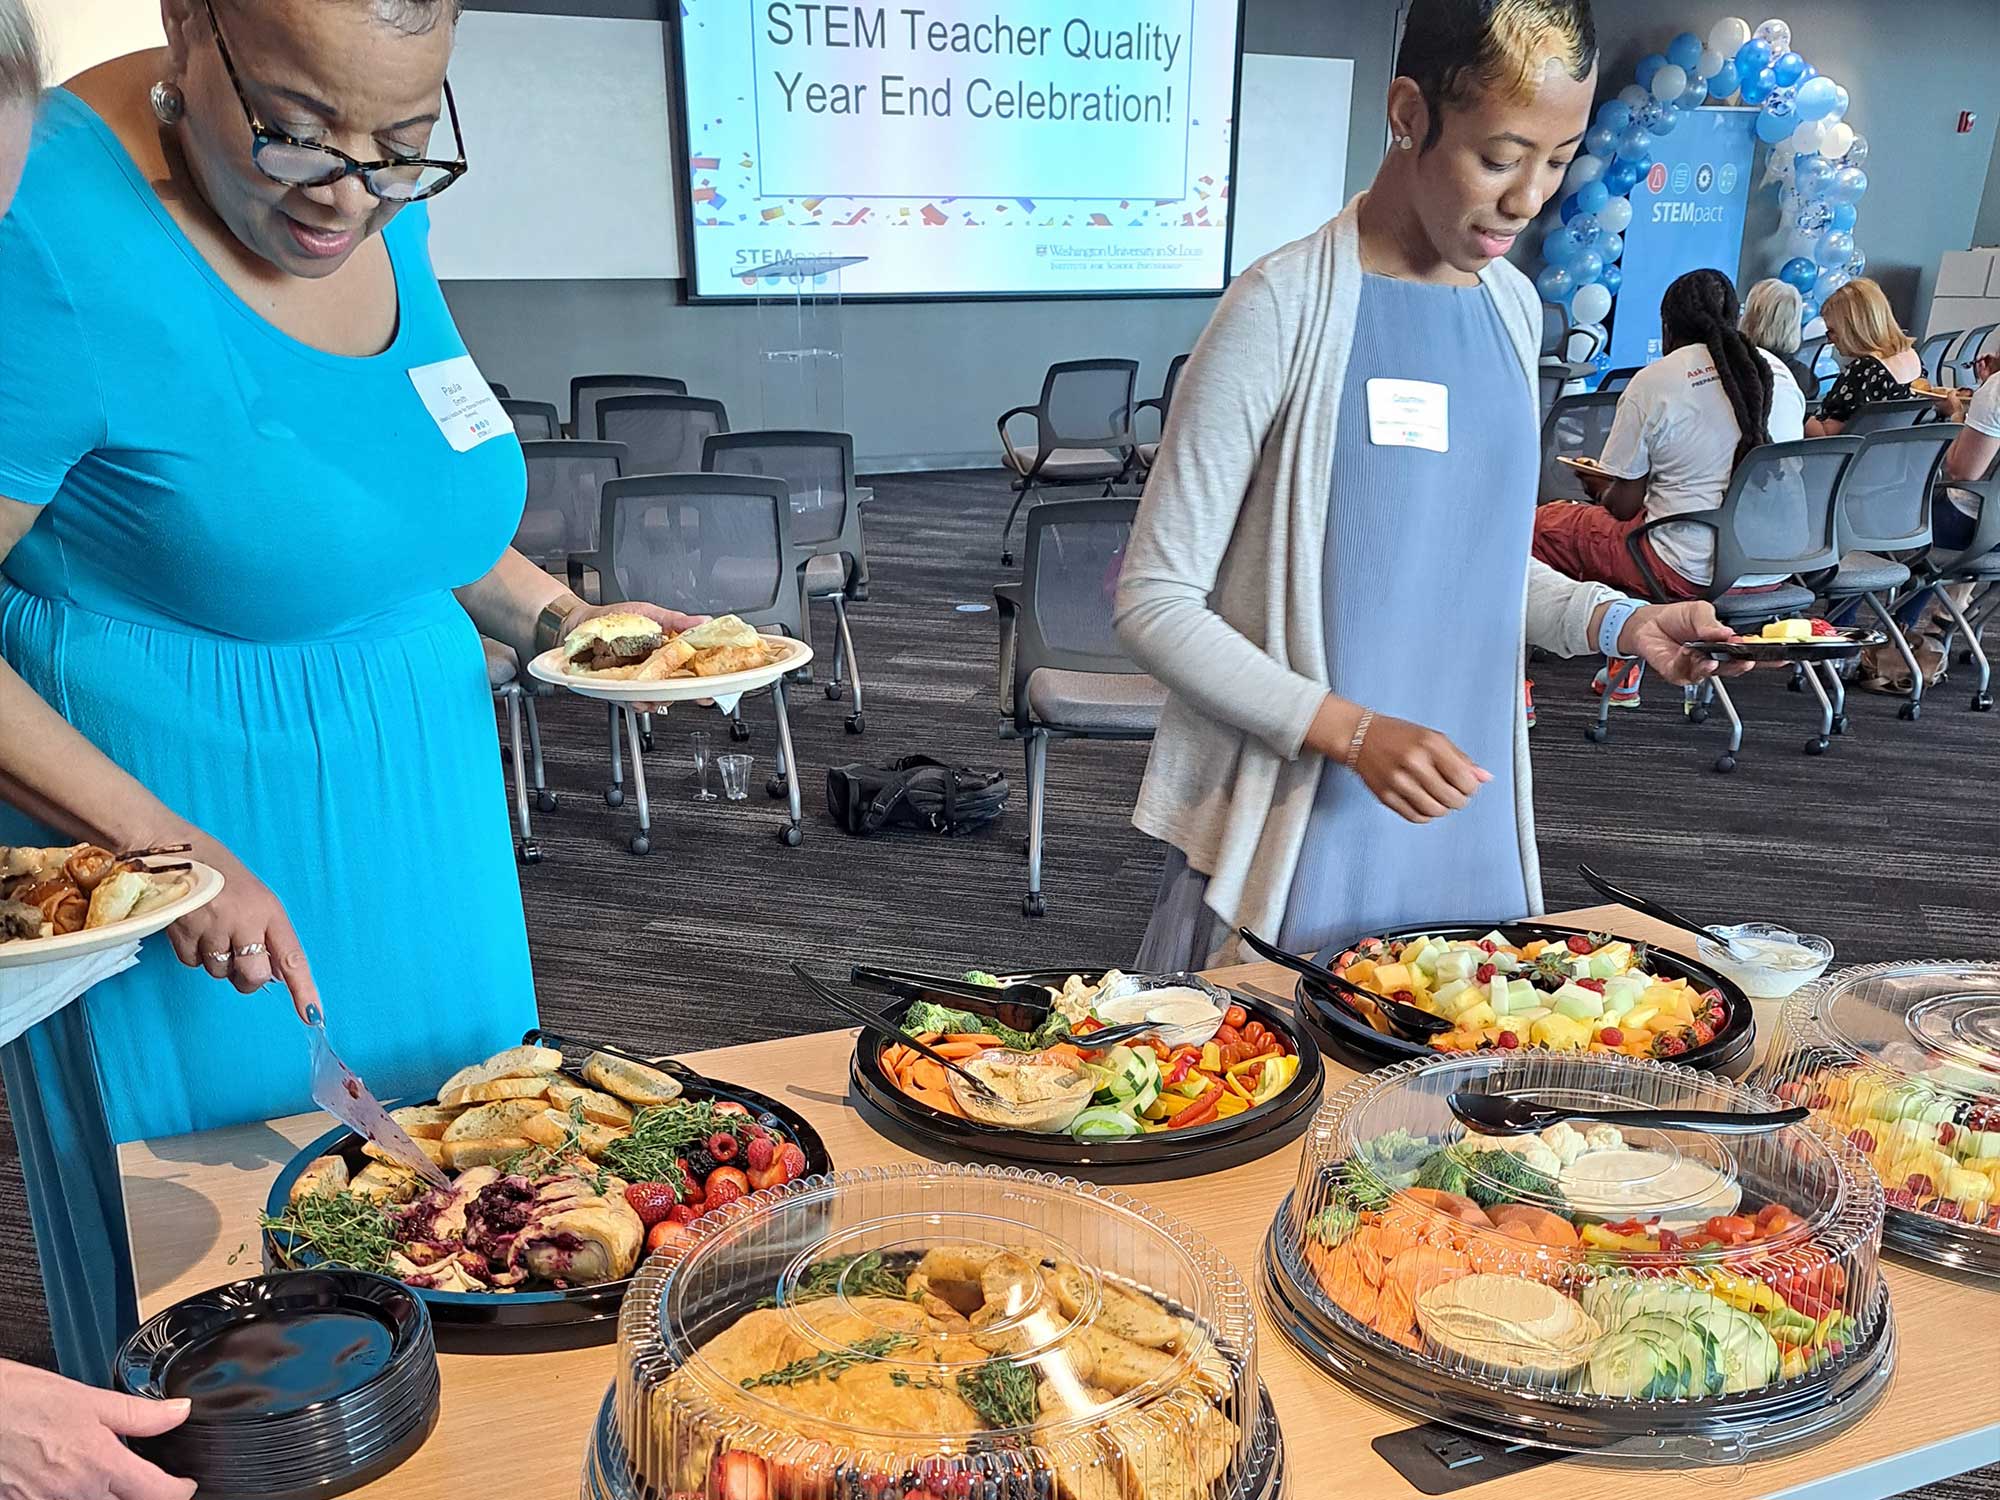 two black women serve themselves food from a table of catered platters of food. a sign in the background indicates that this is a STEM teacher appreciation event. 